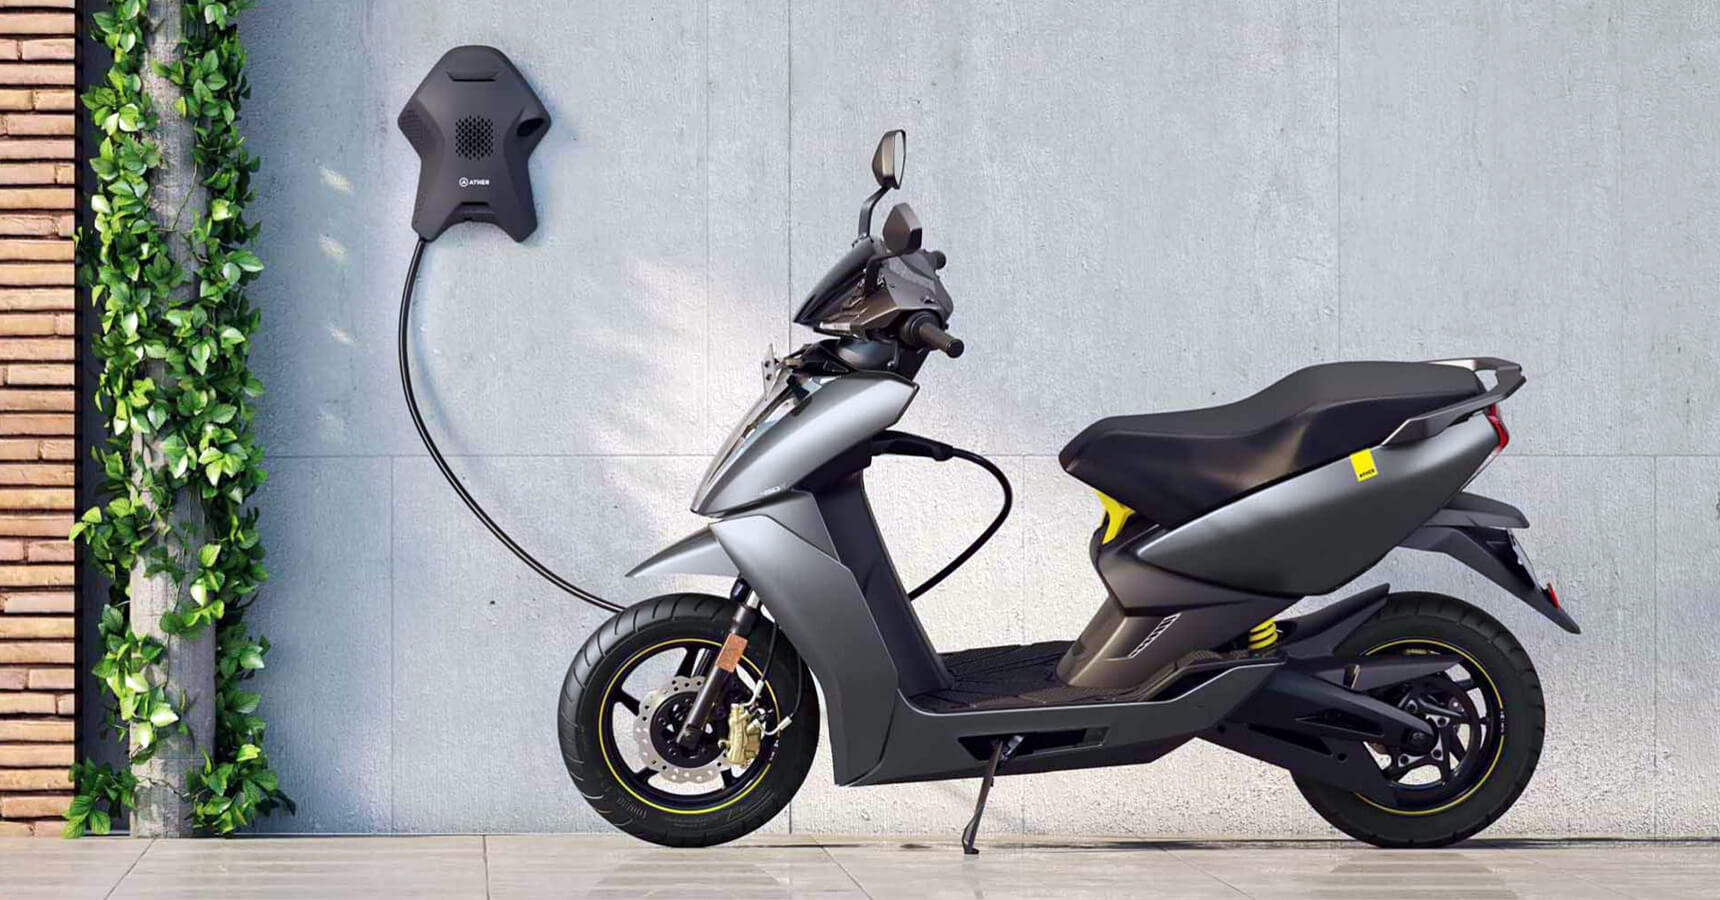 Ather Energy E-Scooter clocked over 389 million Km